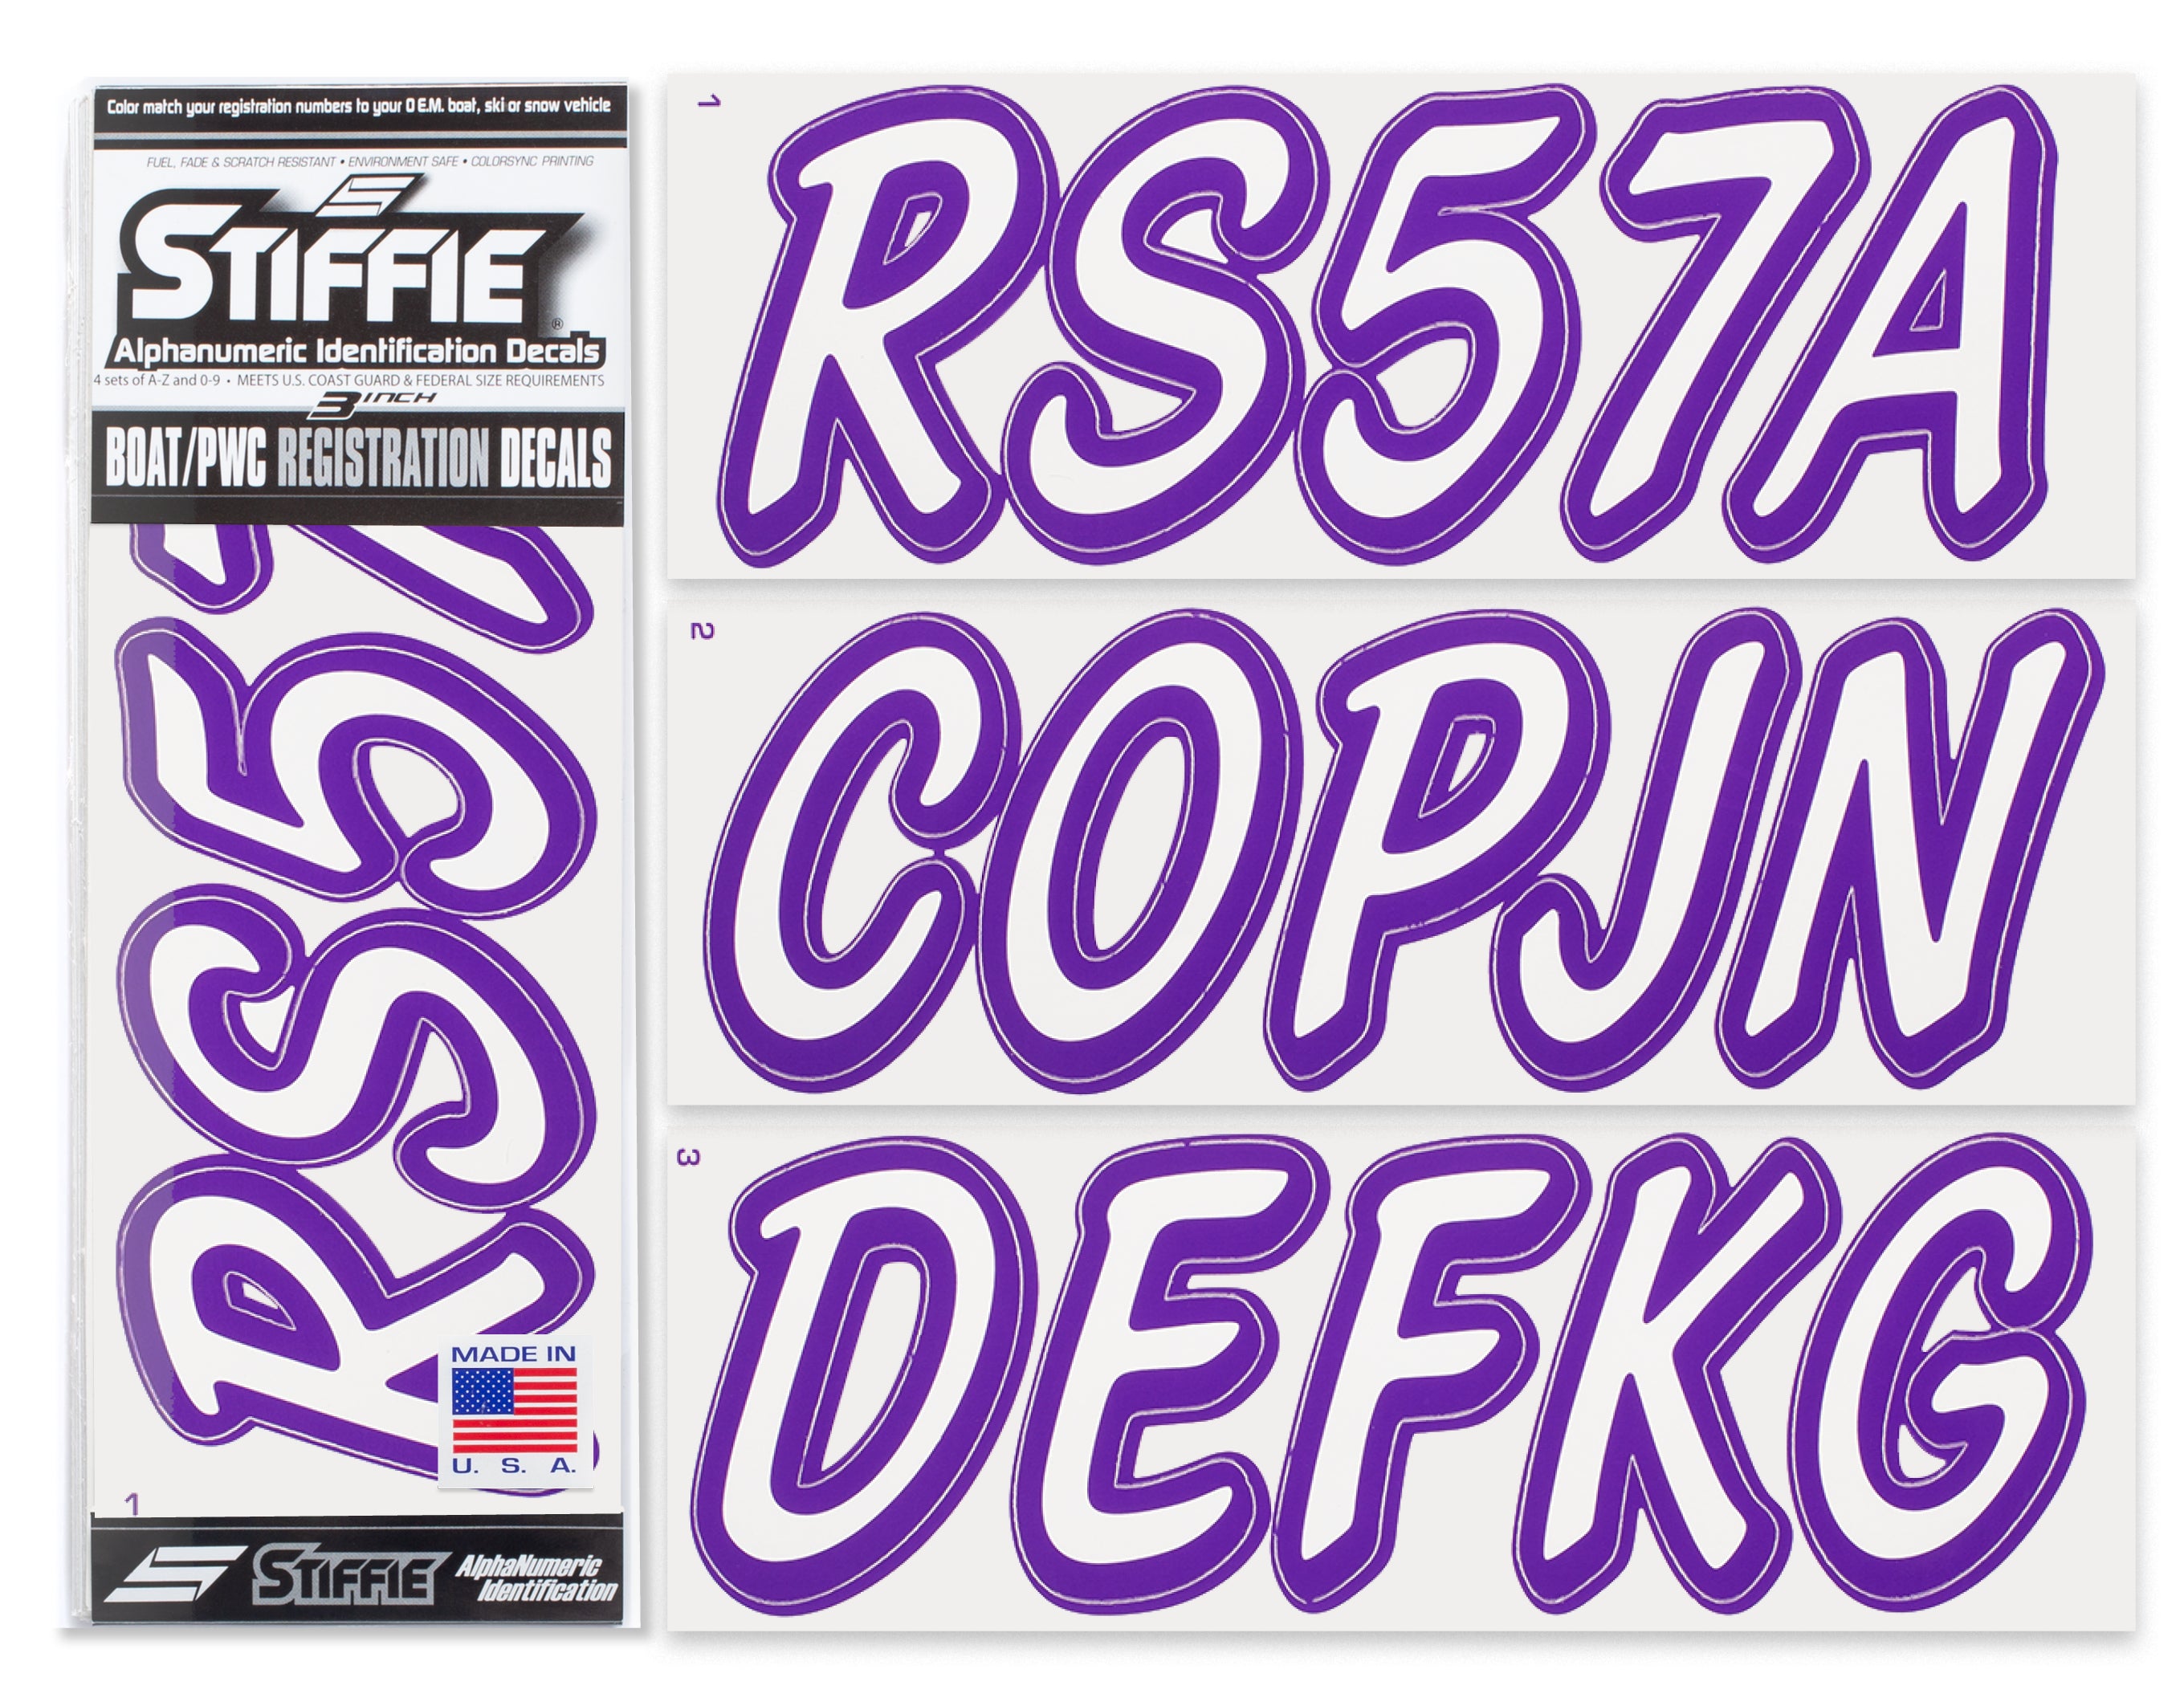 STIFFIE Whipline Solid White/Purple 3" Alpha-Numeric Registration Identification Numbers Stickers Decals for Boats & Personal Watercraft